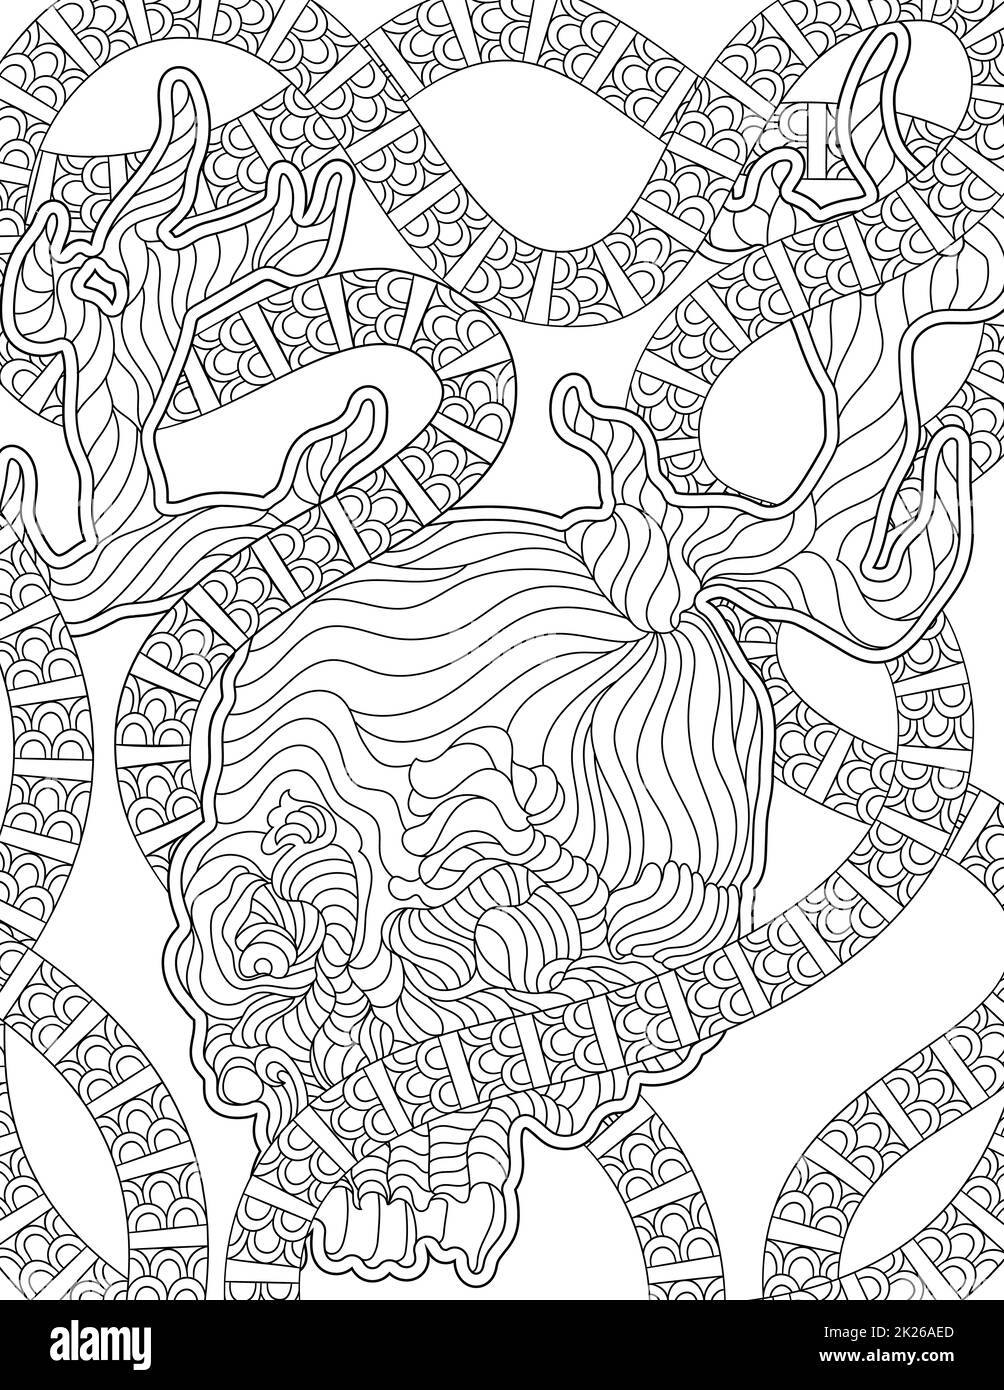 Skull With Snakes Around Line Drawing Coloring Book Detailed idea Stock Photo